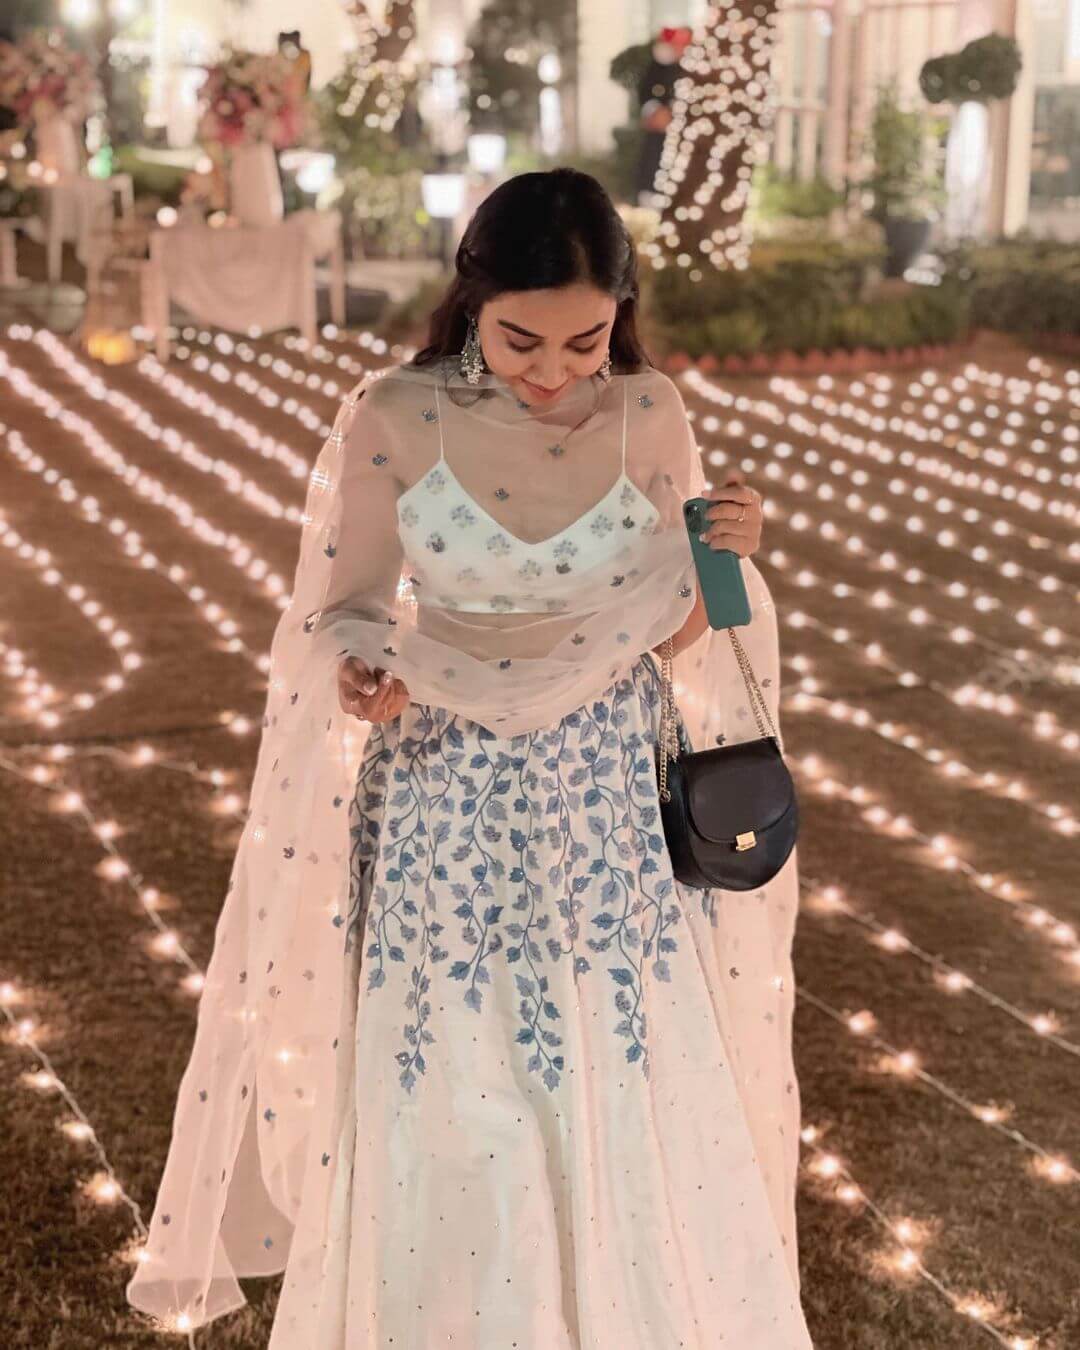 20+ Trending Diwali Outfit Ideas for you to choose from Elegant white Lehenga for you to shine on Diwali